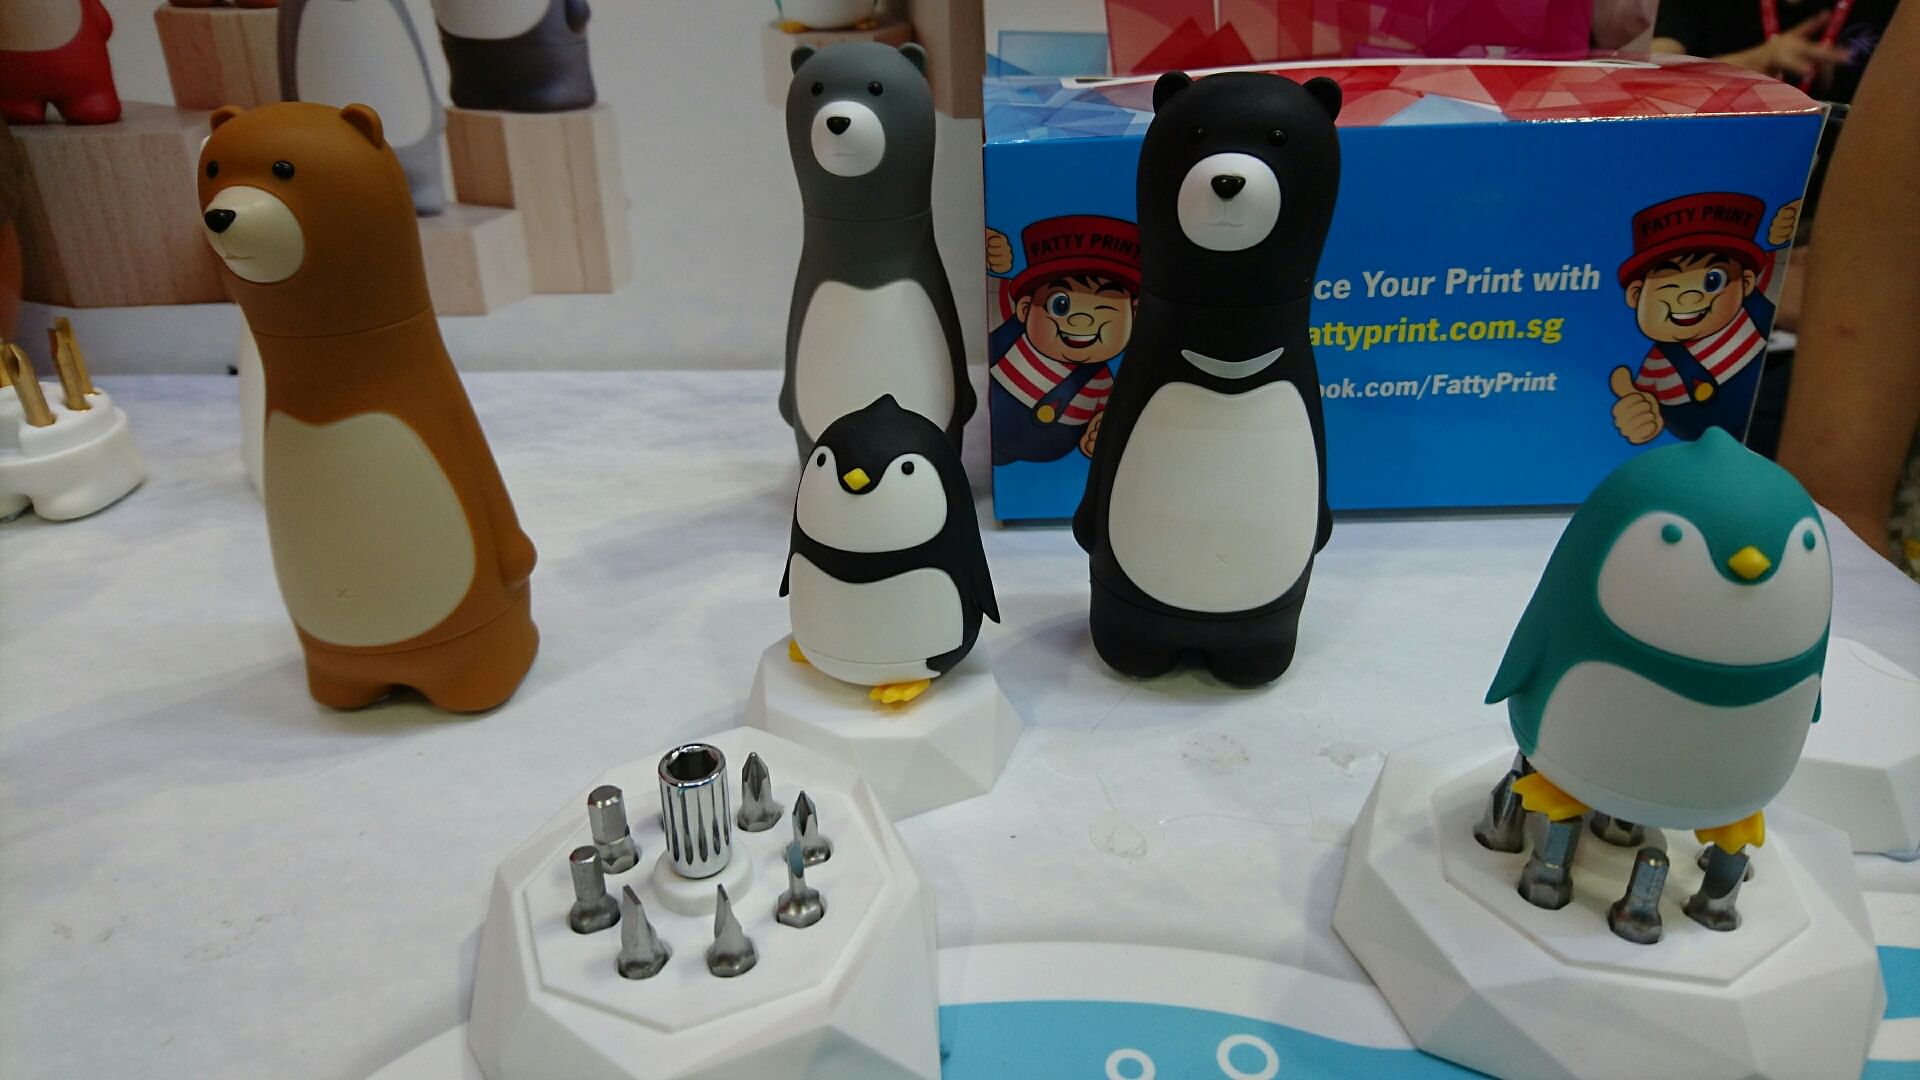 Great finds at the Singapore Gifts & Premiums Fair - Home & Decor Singapore